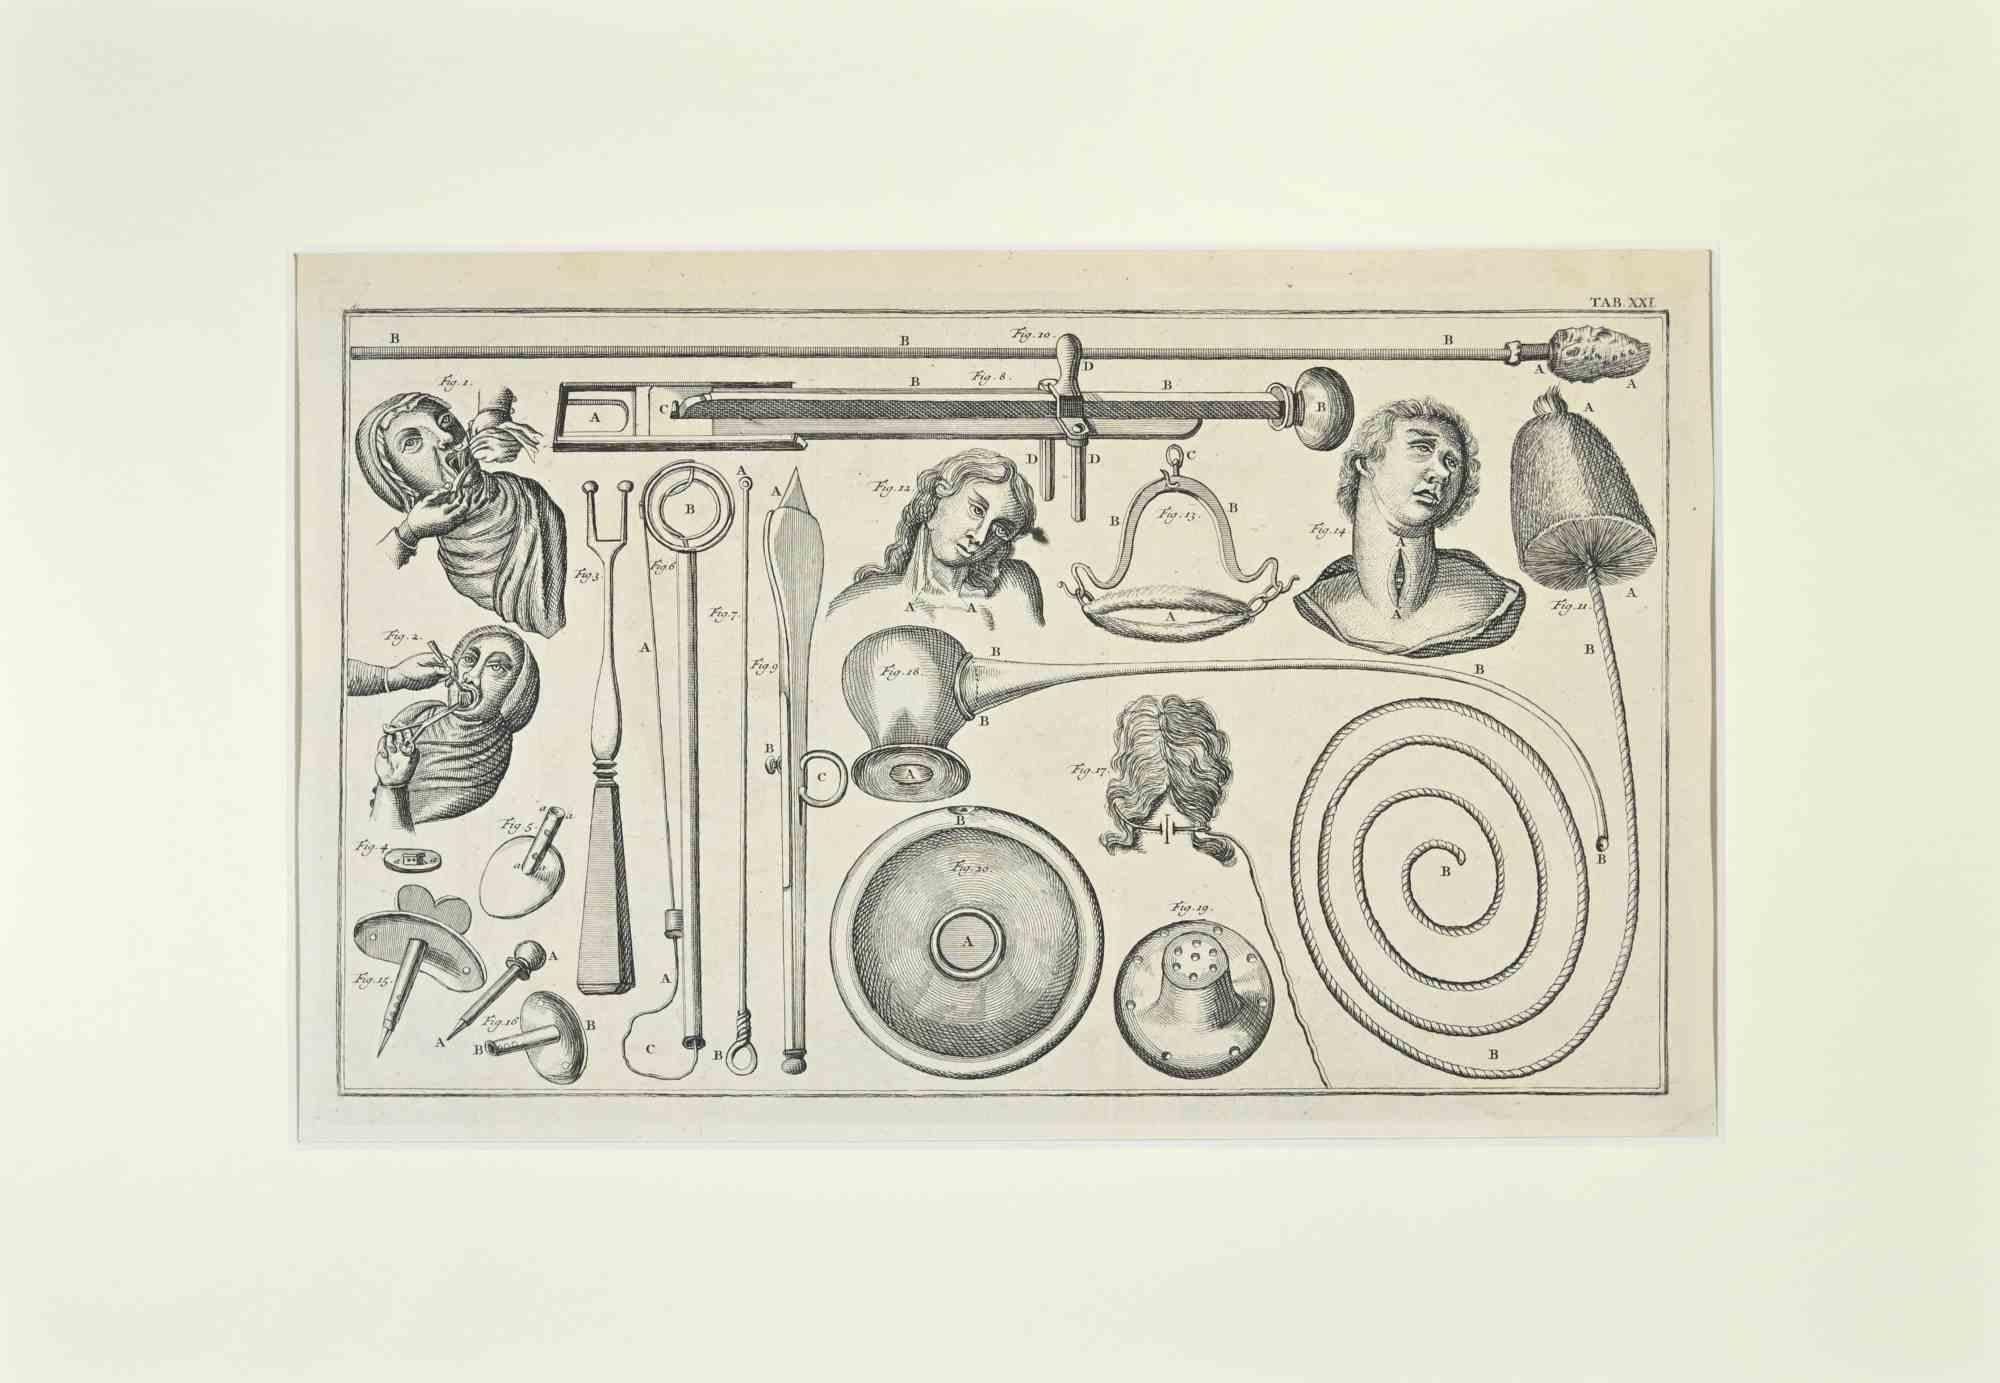 Human Anatomy from the Suite Institutiones Chirurgicae by Lorenz Heister. Amsterdam, Janssonius-Waesberg, 1750.

Etching on paper.

The work belongs to the Latin edition of the famous work by the founder of modern surgery, first published in 1718.